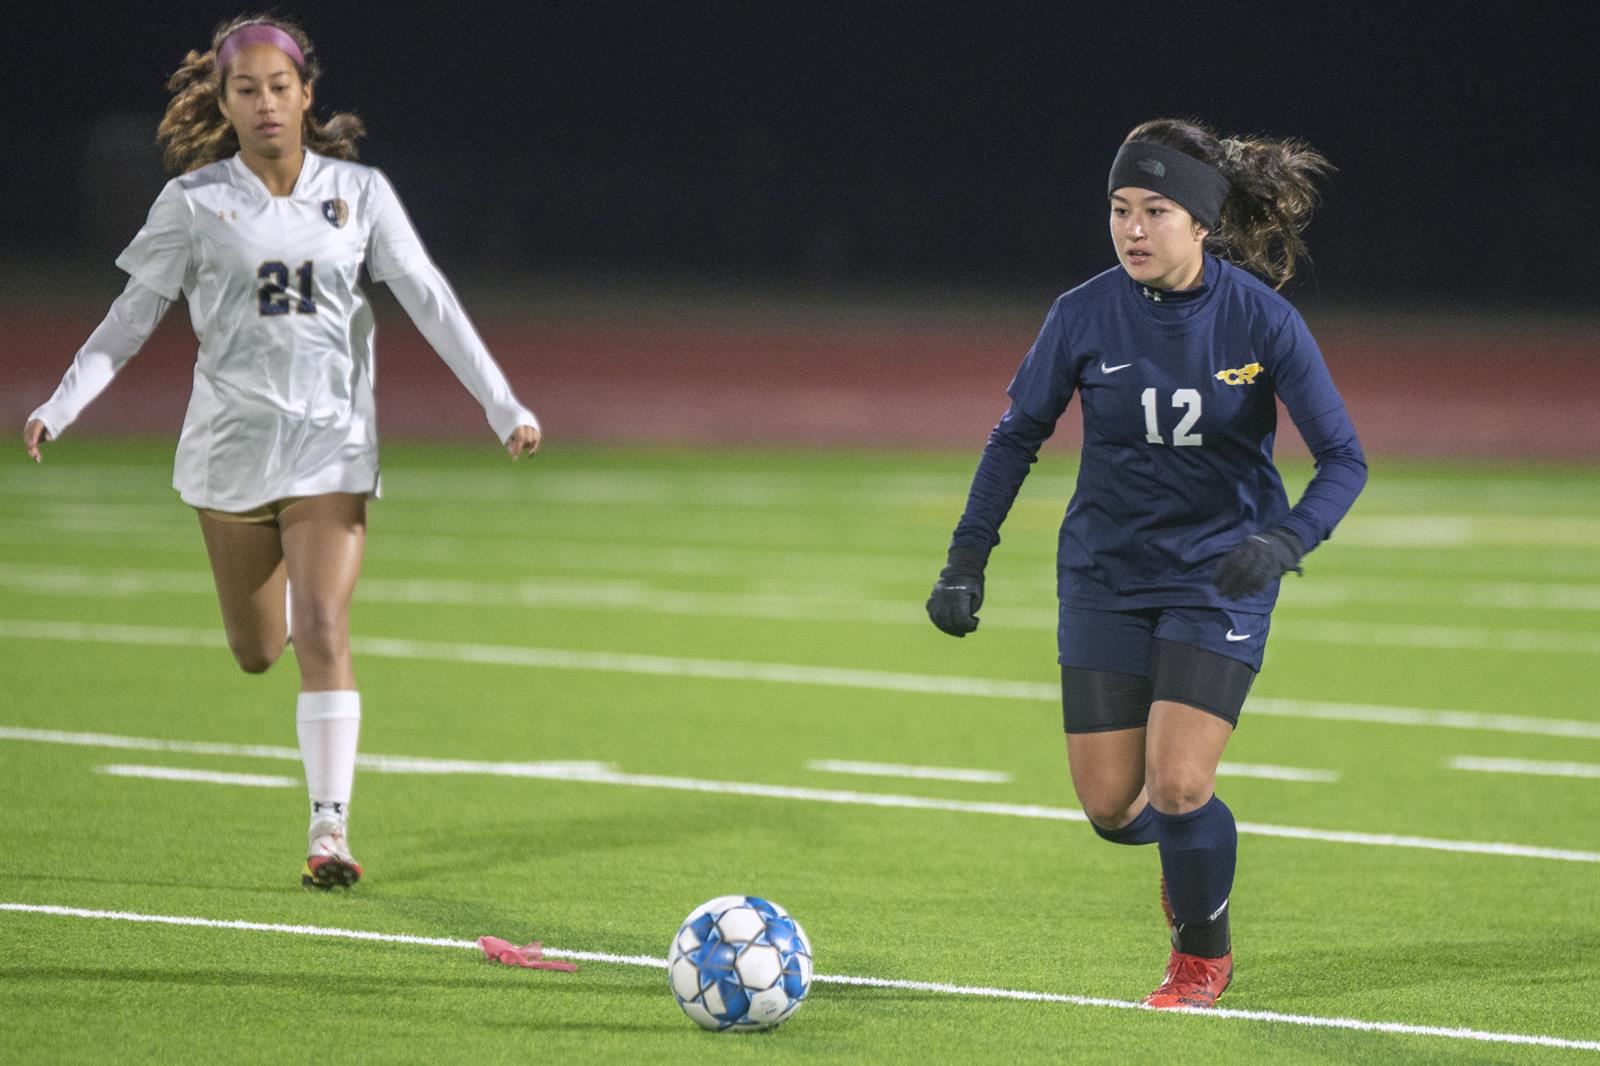 Cypress Ranch High School senior Melanny Caldas (No. 12) shared District 16-6A’s Defensive Most Valuable Player honors.